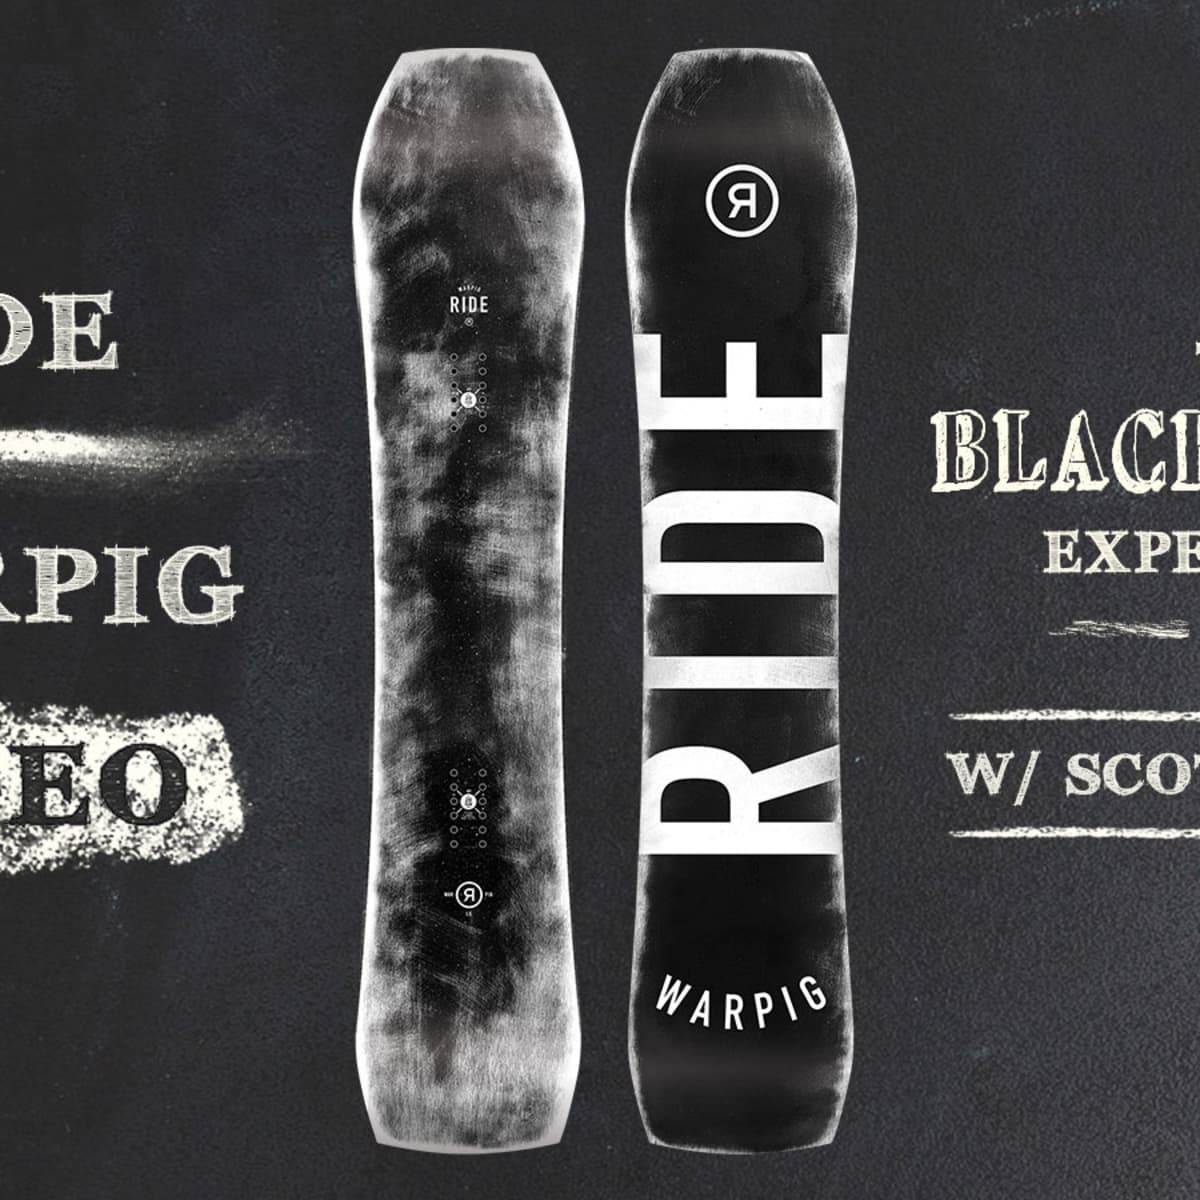 2018 Ride Warpig Snowboard Review - Blackboard Experiment with